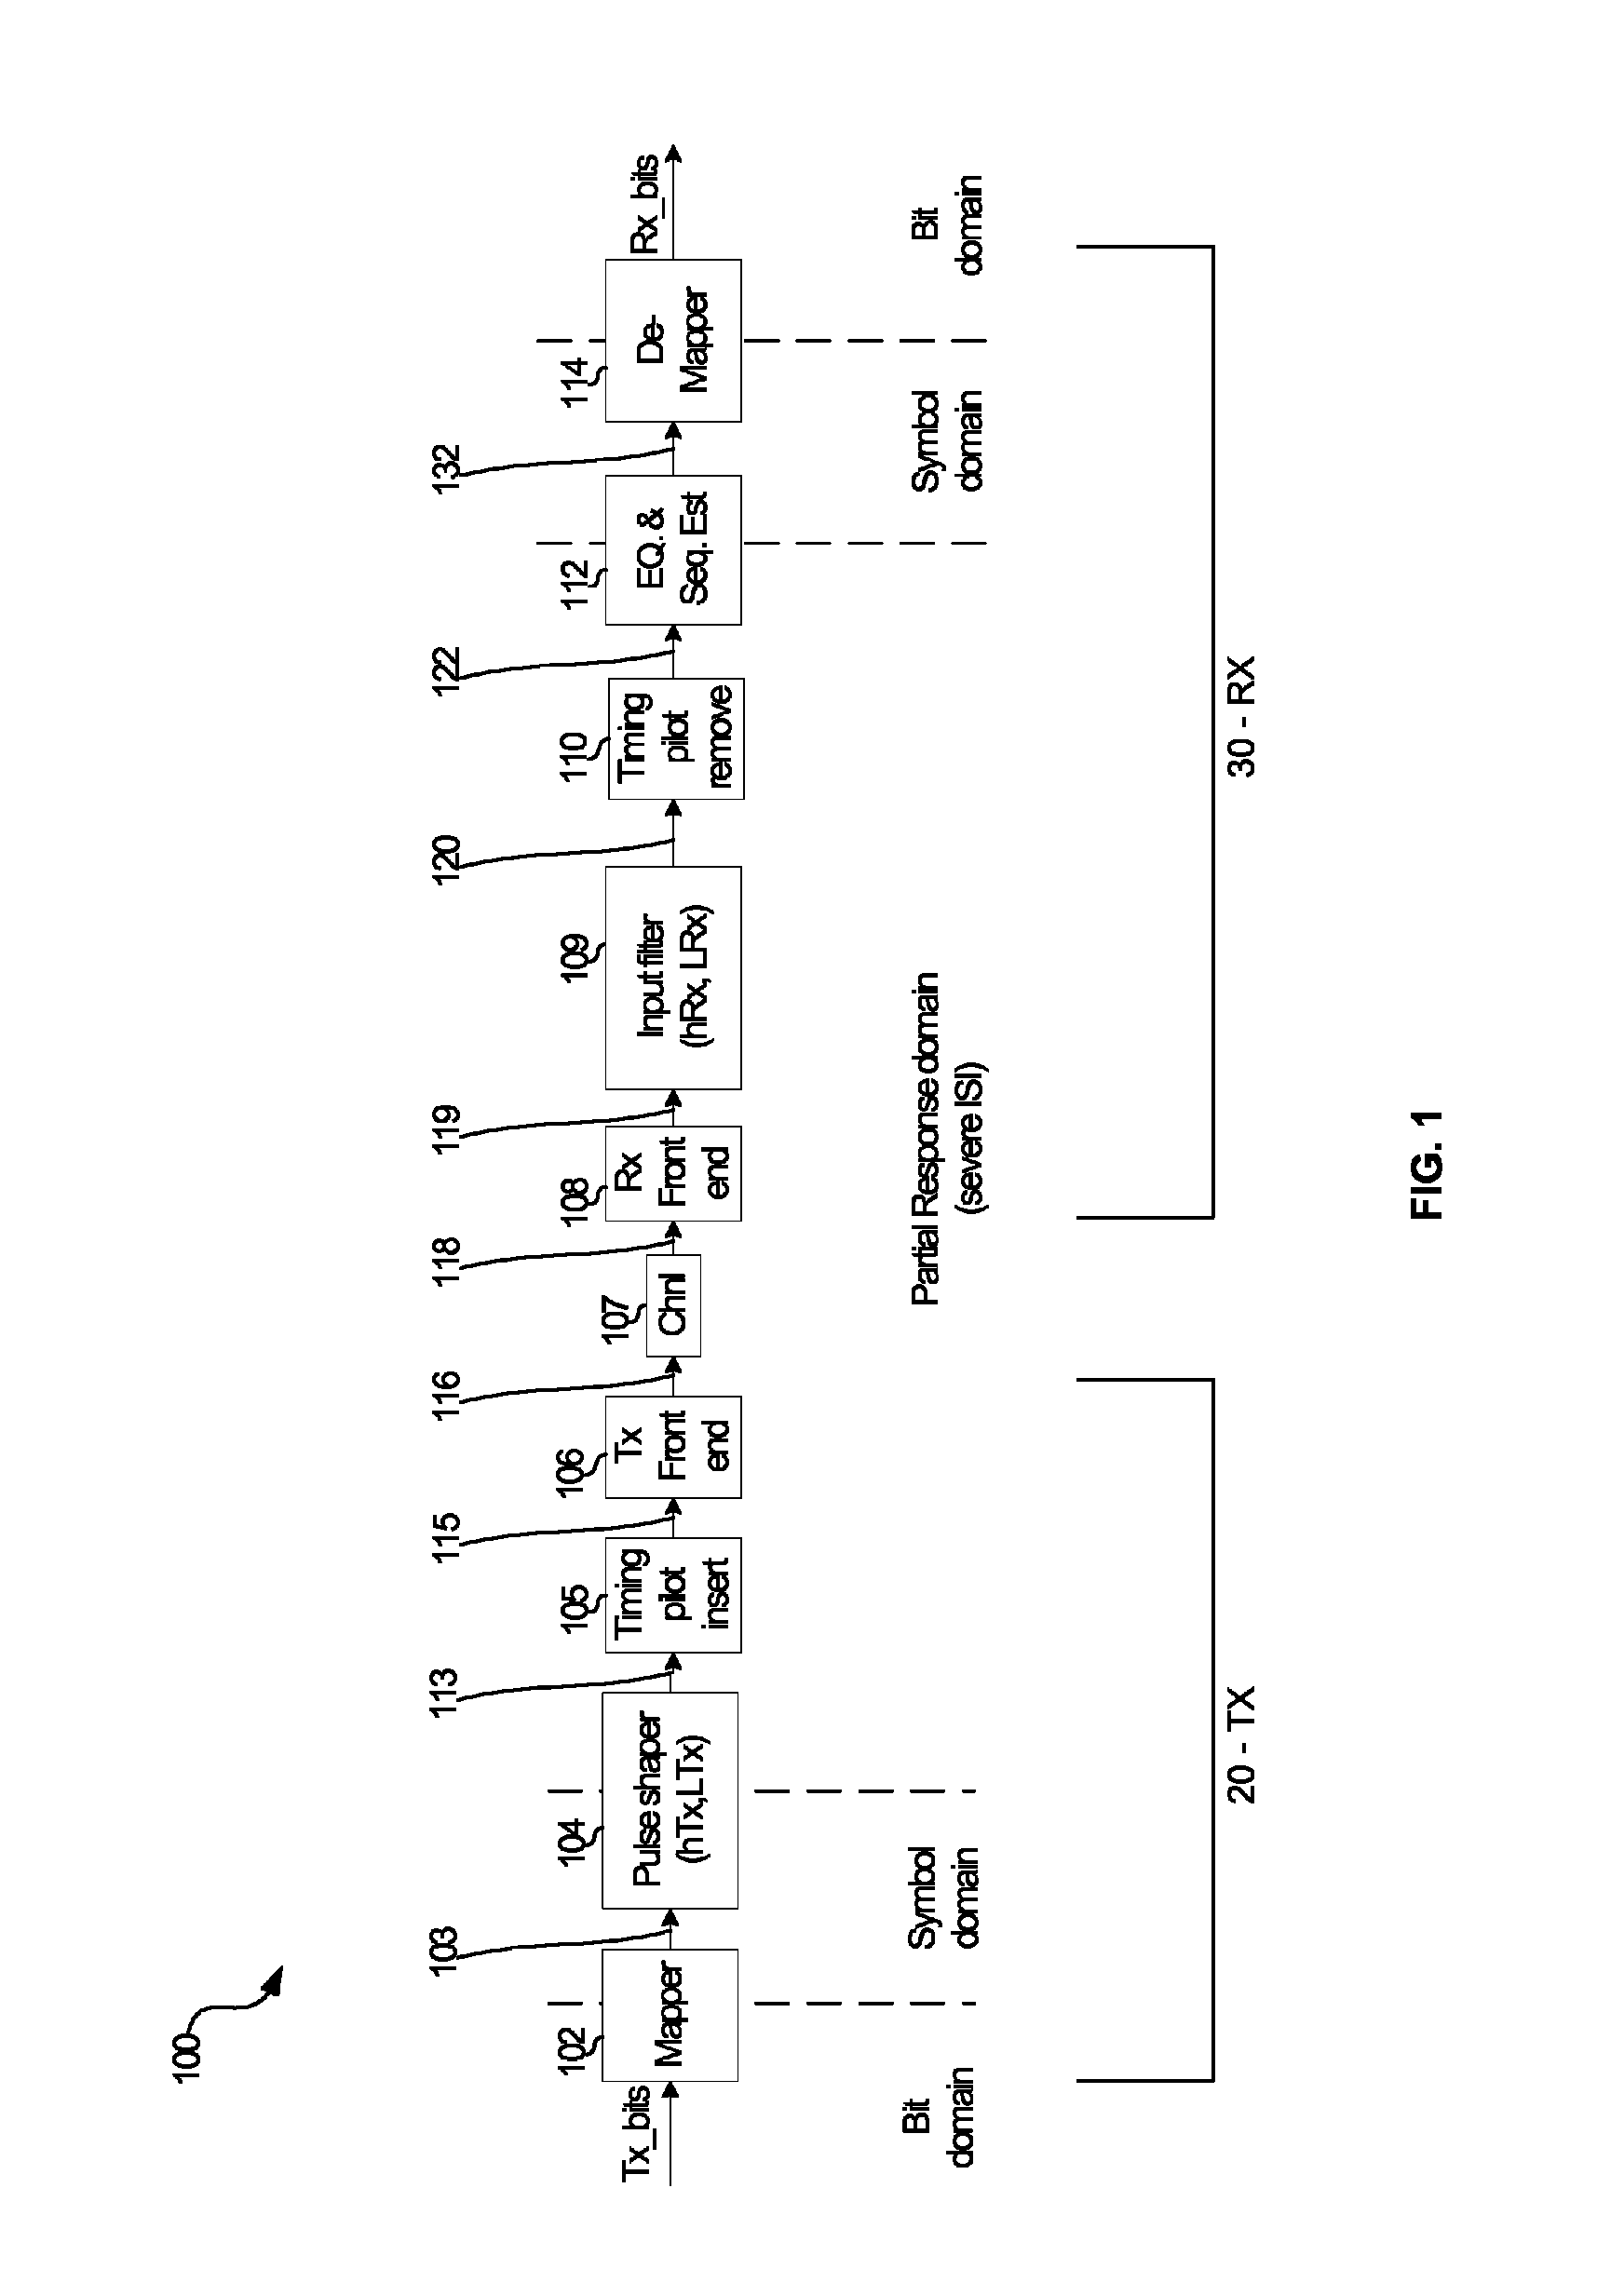 Timing pilot generation for highly-spectrally-efficient communications